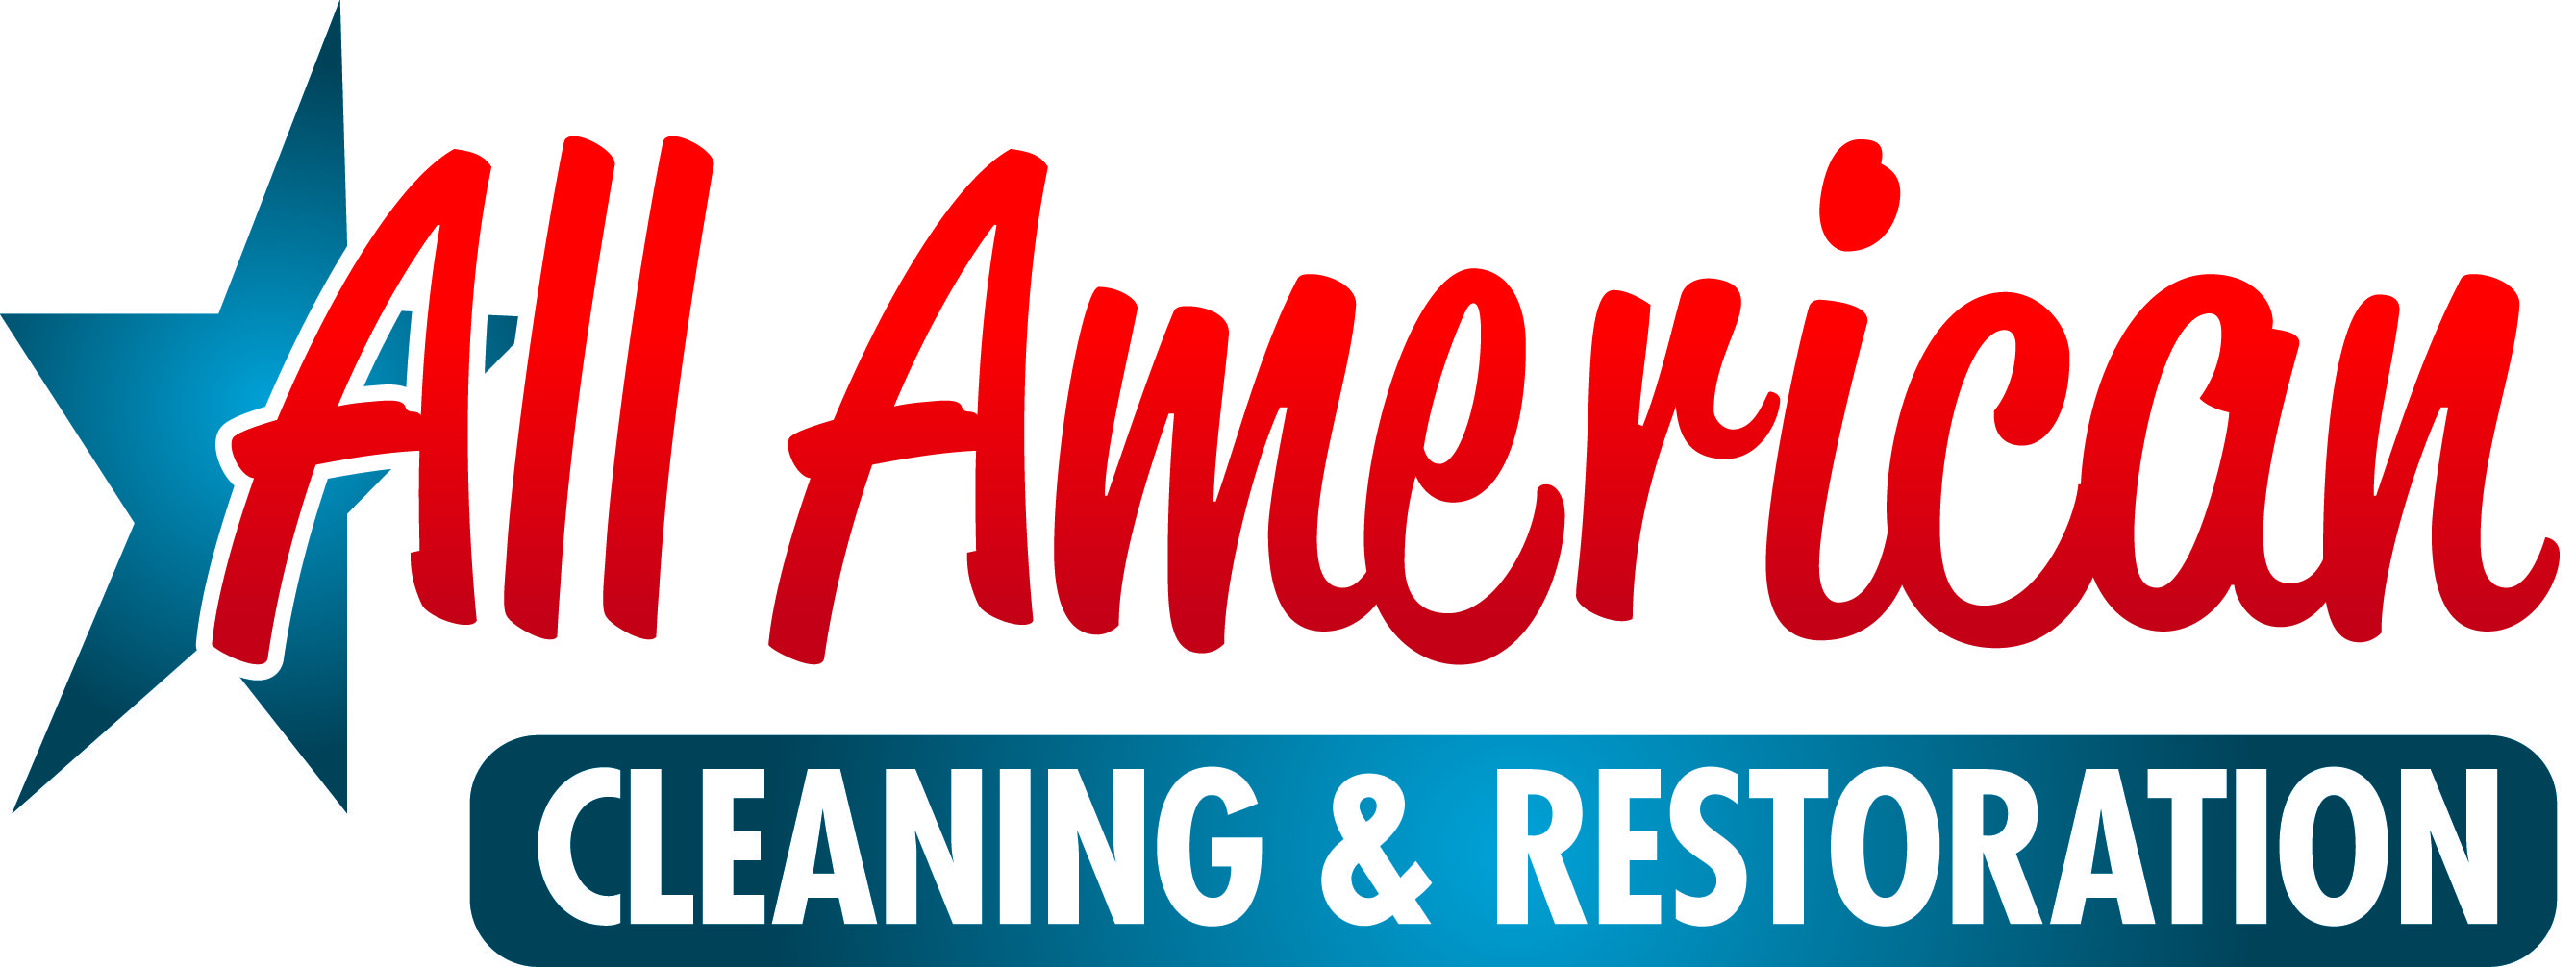 All American Cleaning & Restoration